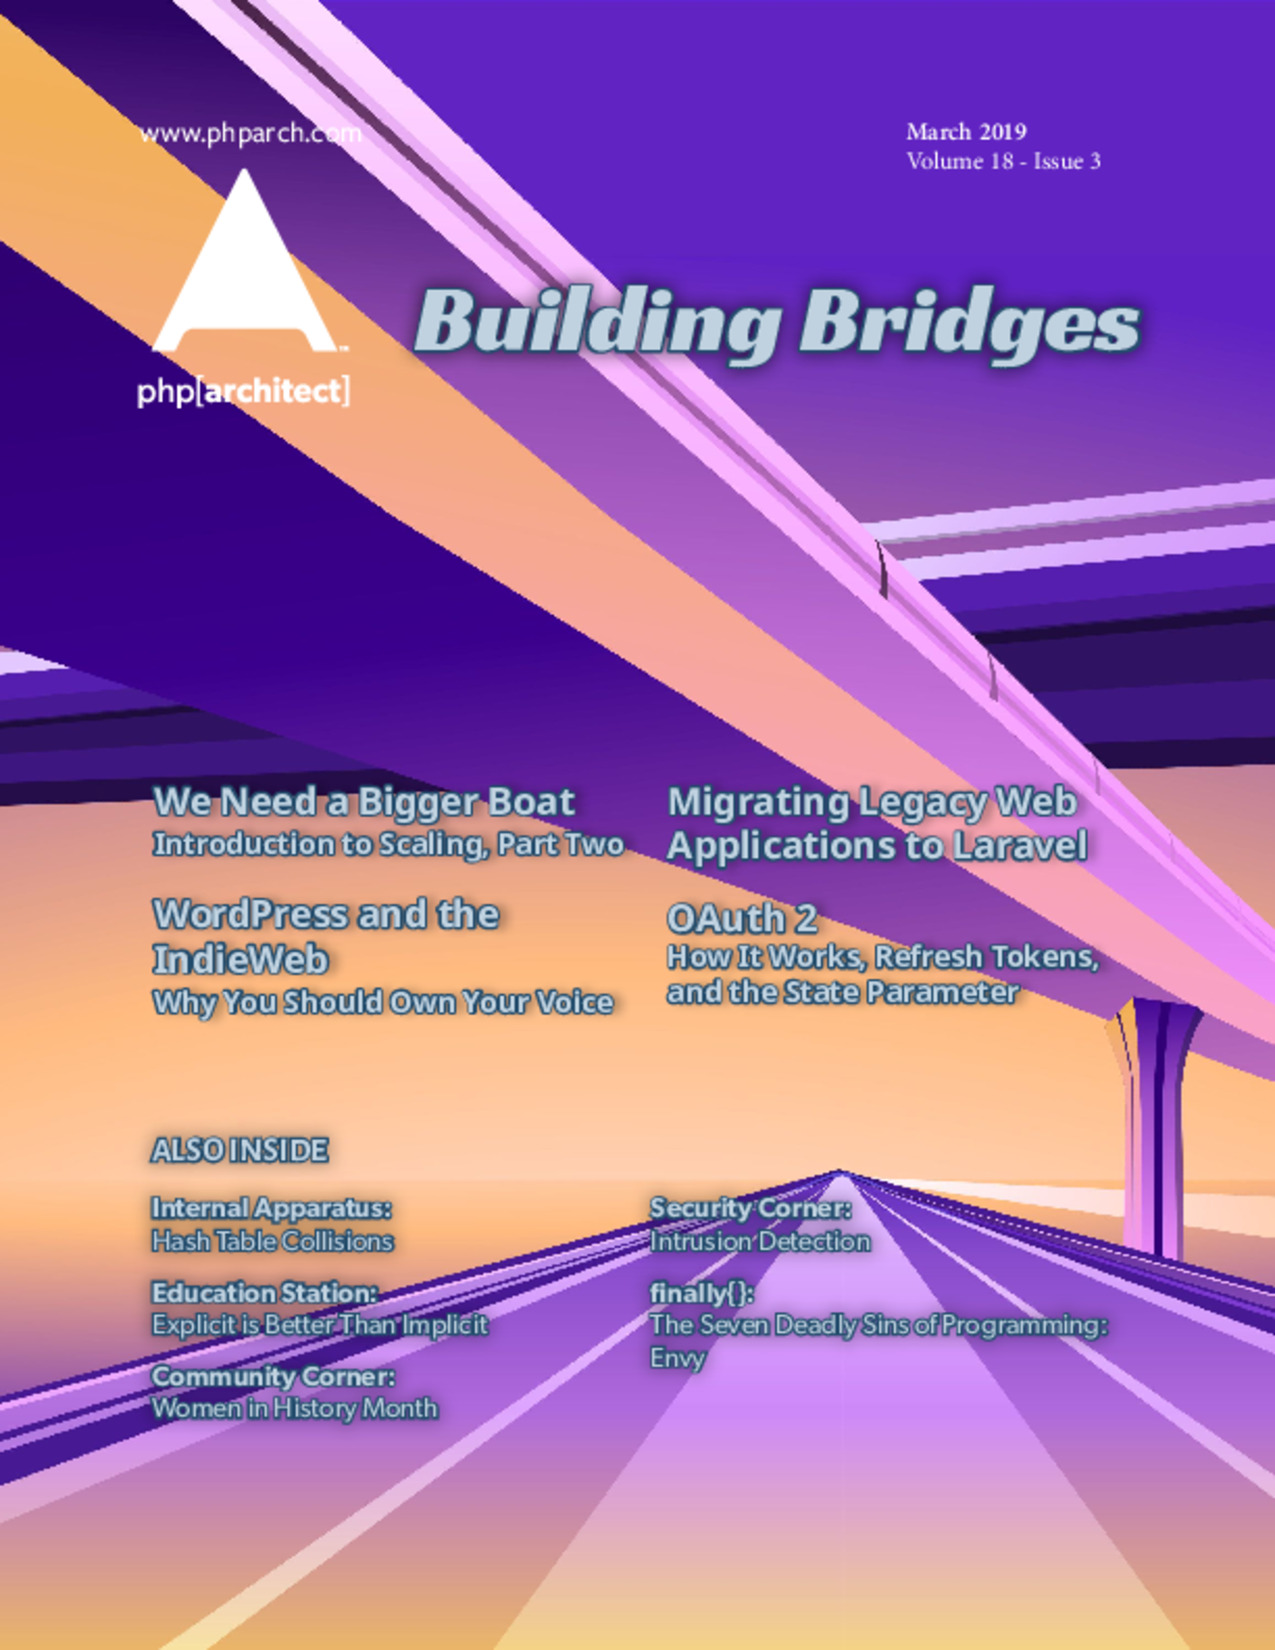 March 2019 Magazine cover. Stylized bridges over a highway